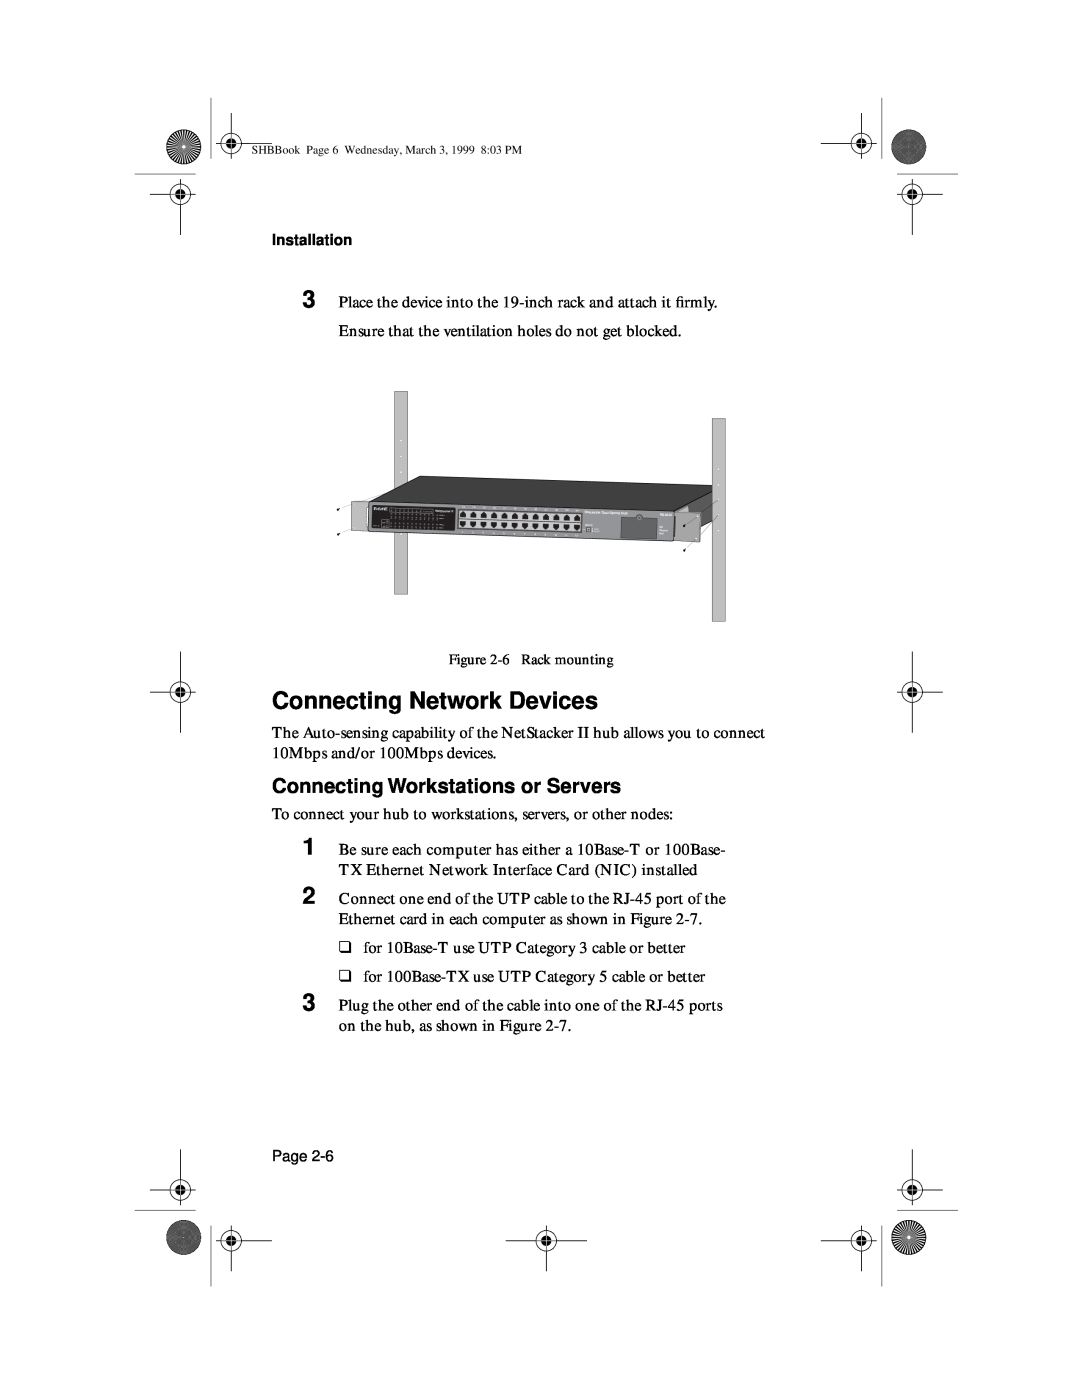 Asante Technologies II user manual Connecting Network Devices, Connecting Workstations or Servers 